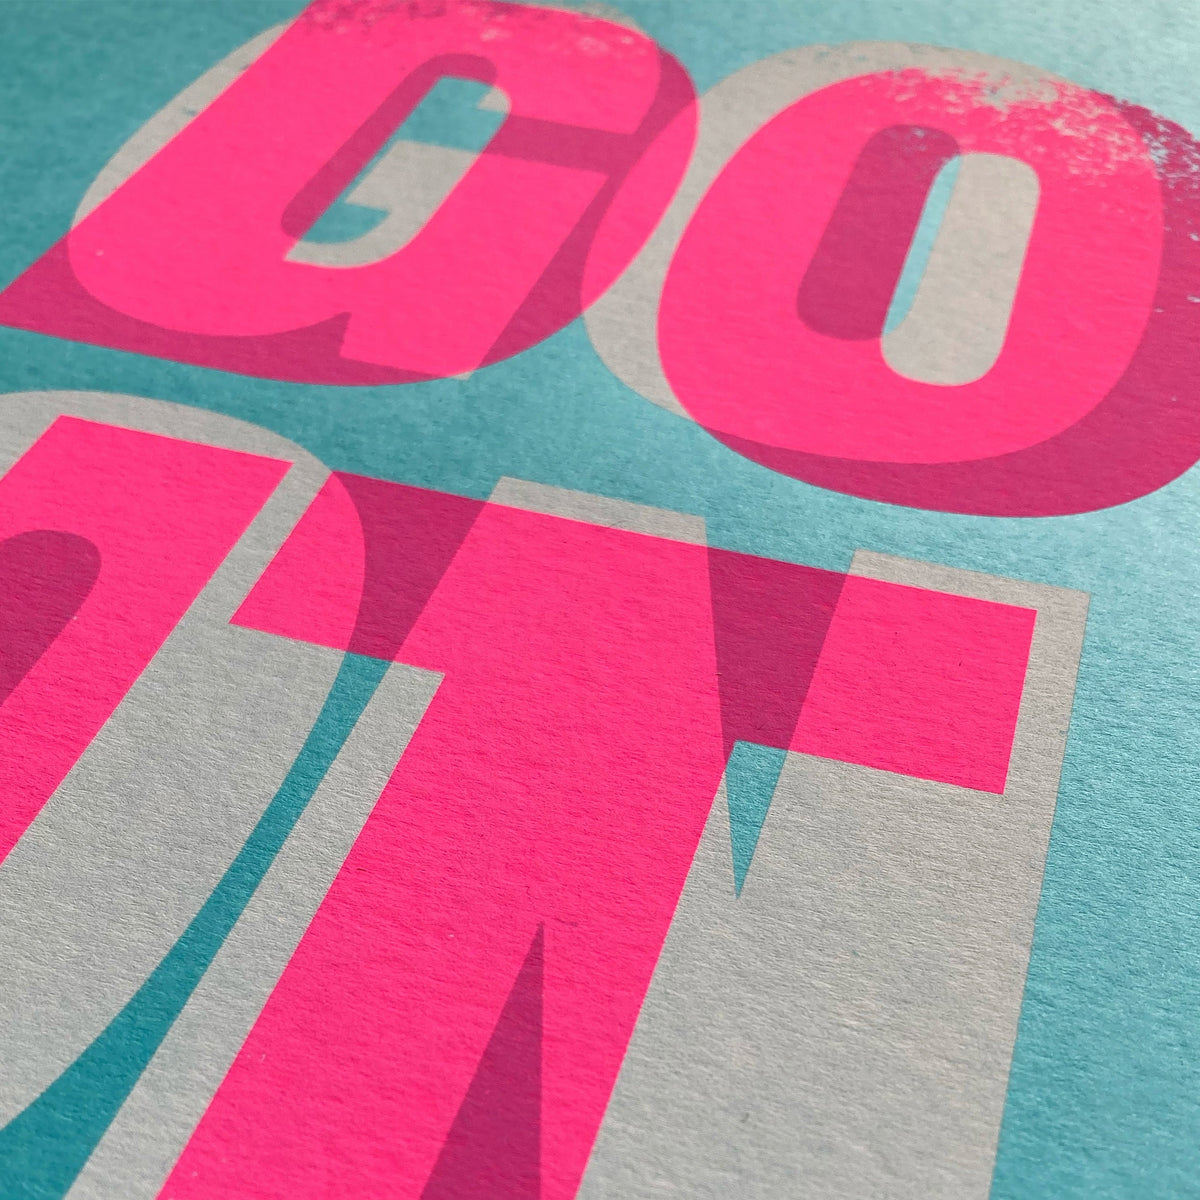 Go On, Do It-Turquoise (Custom Hooked Framing) by Beanwave Editions